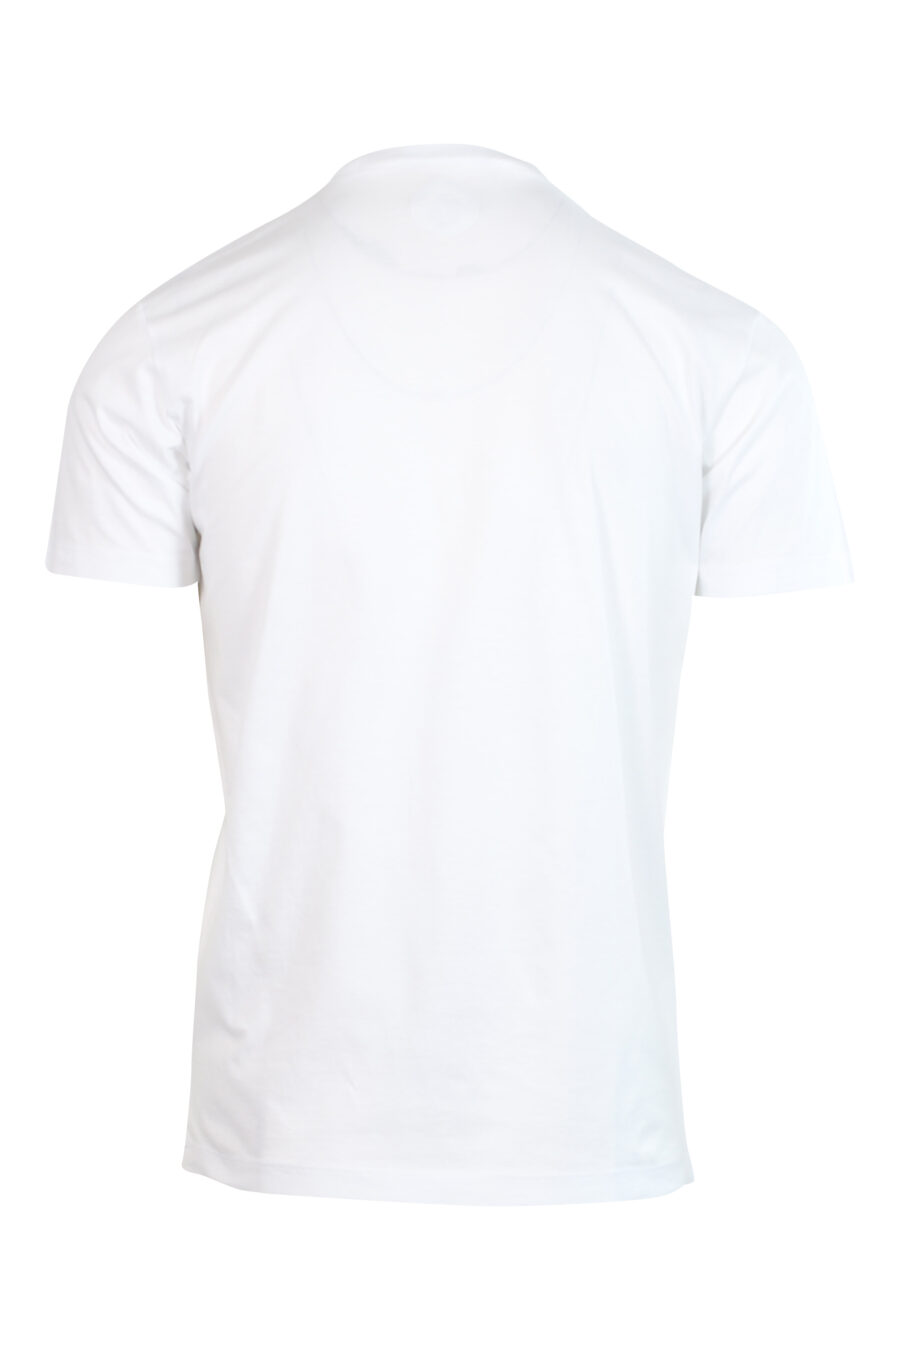 White T-shirt with red logo - 8052134945995 2